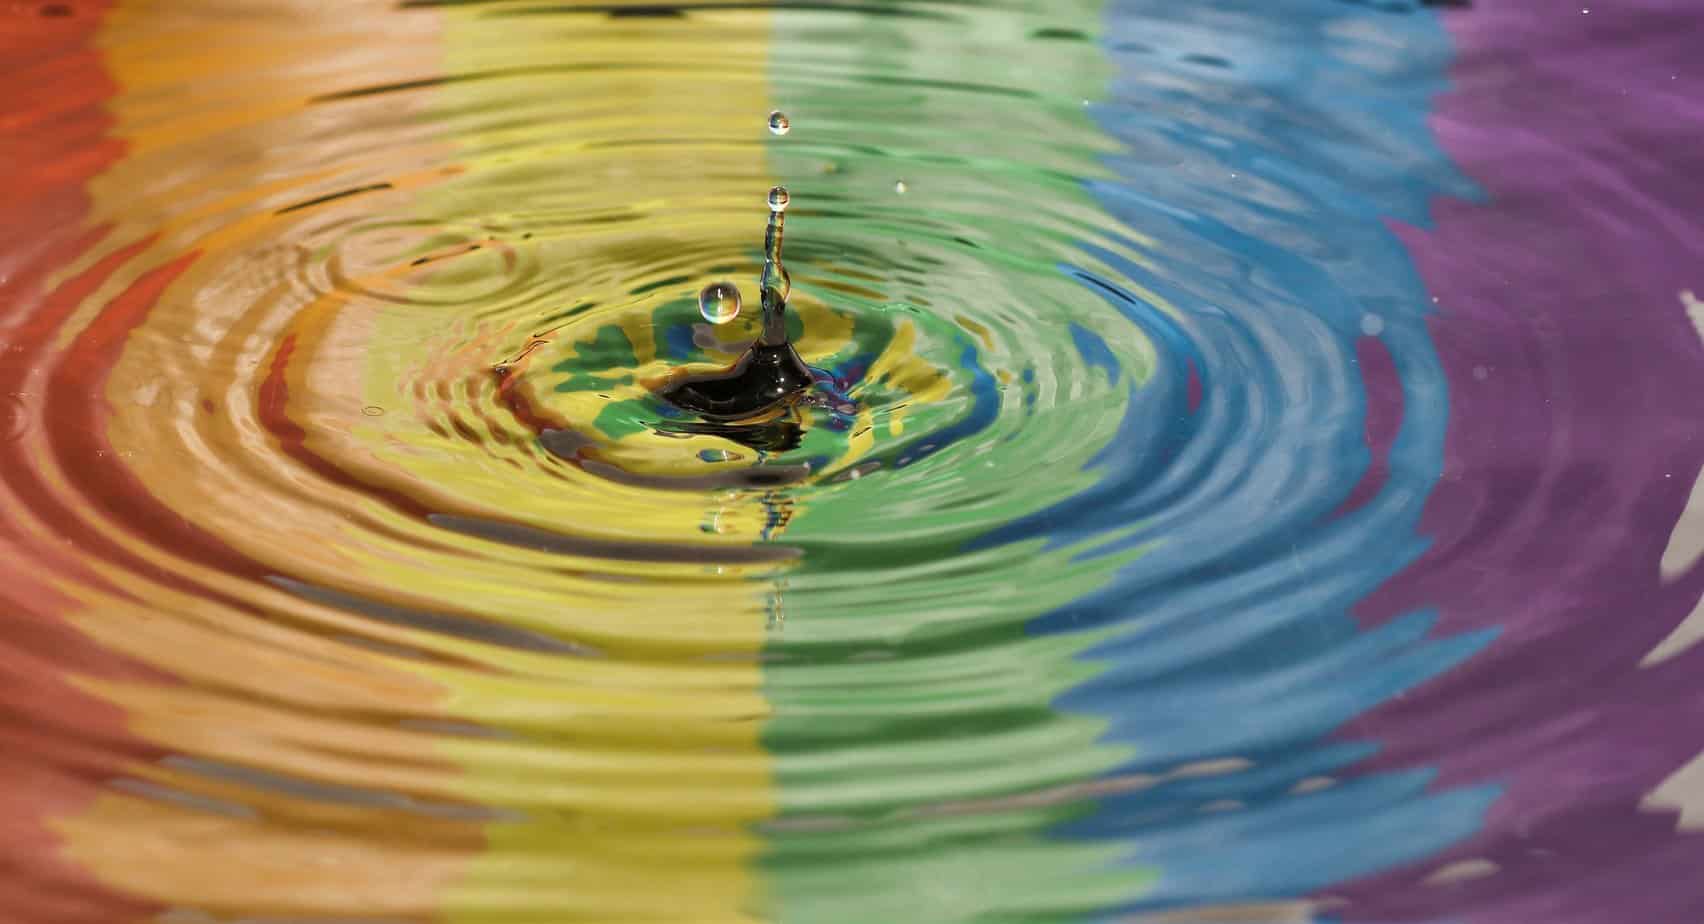 A puddle reflects a rainbow pride flag as a drop of water drips into it, creating ripples.